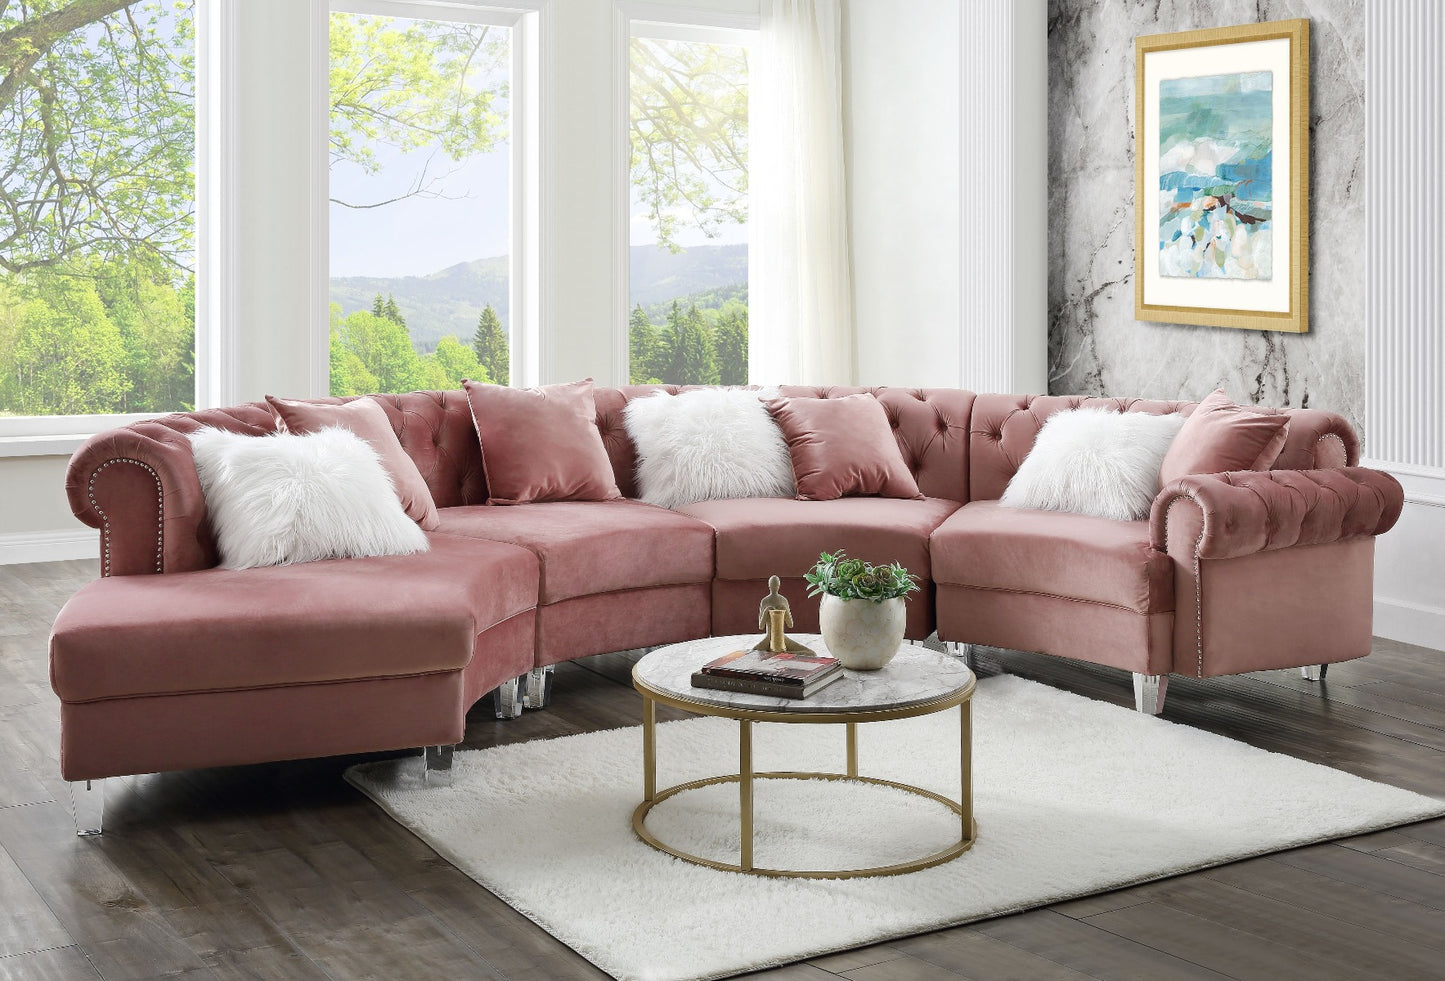 Ninagold 57360 Acme Sectional Sofa - Pink or Gray Velvet